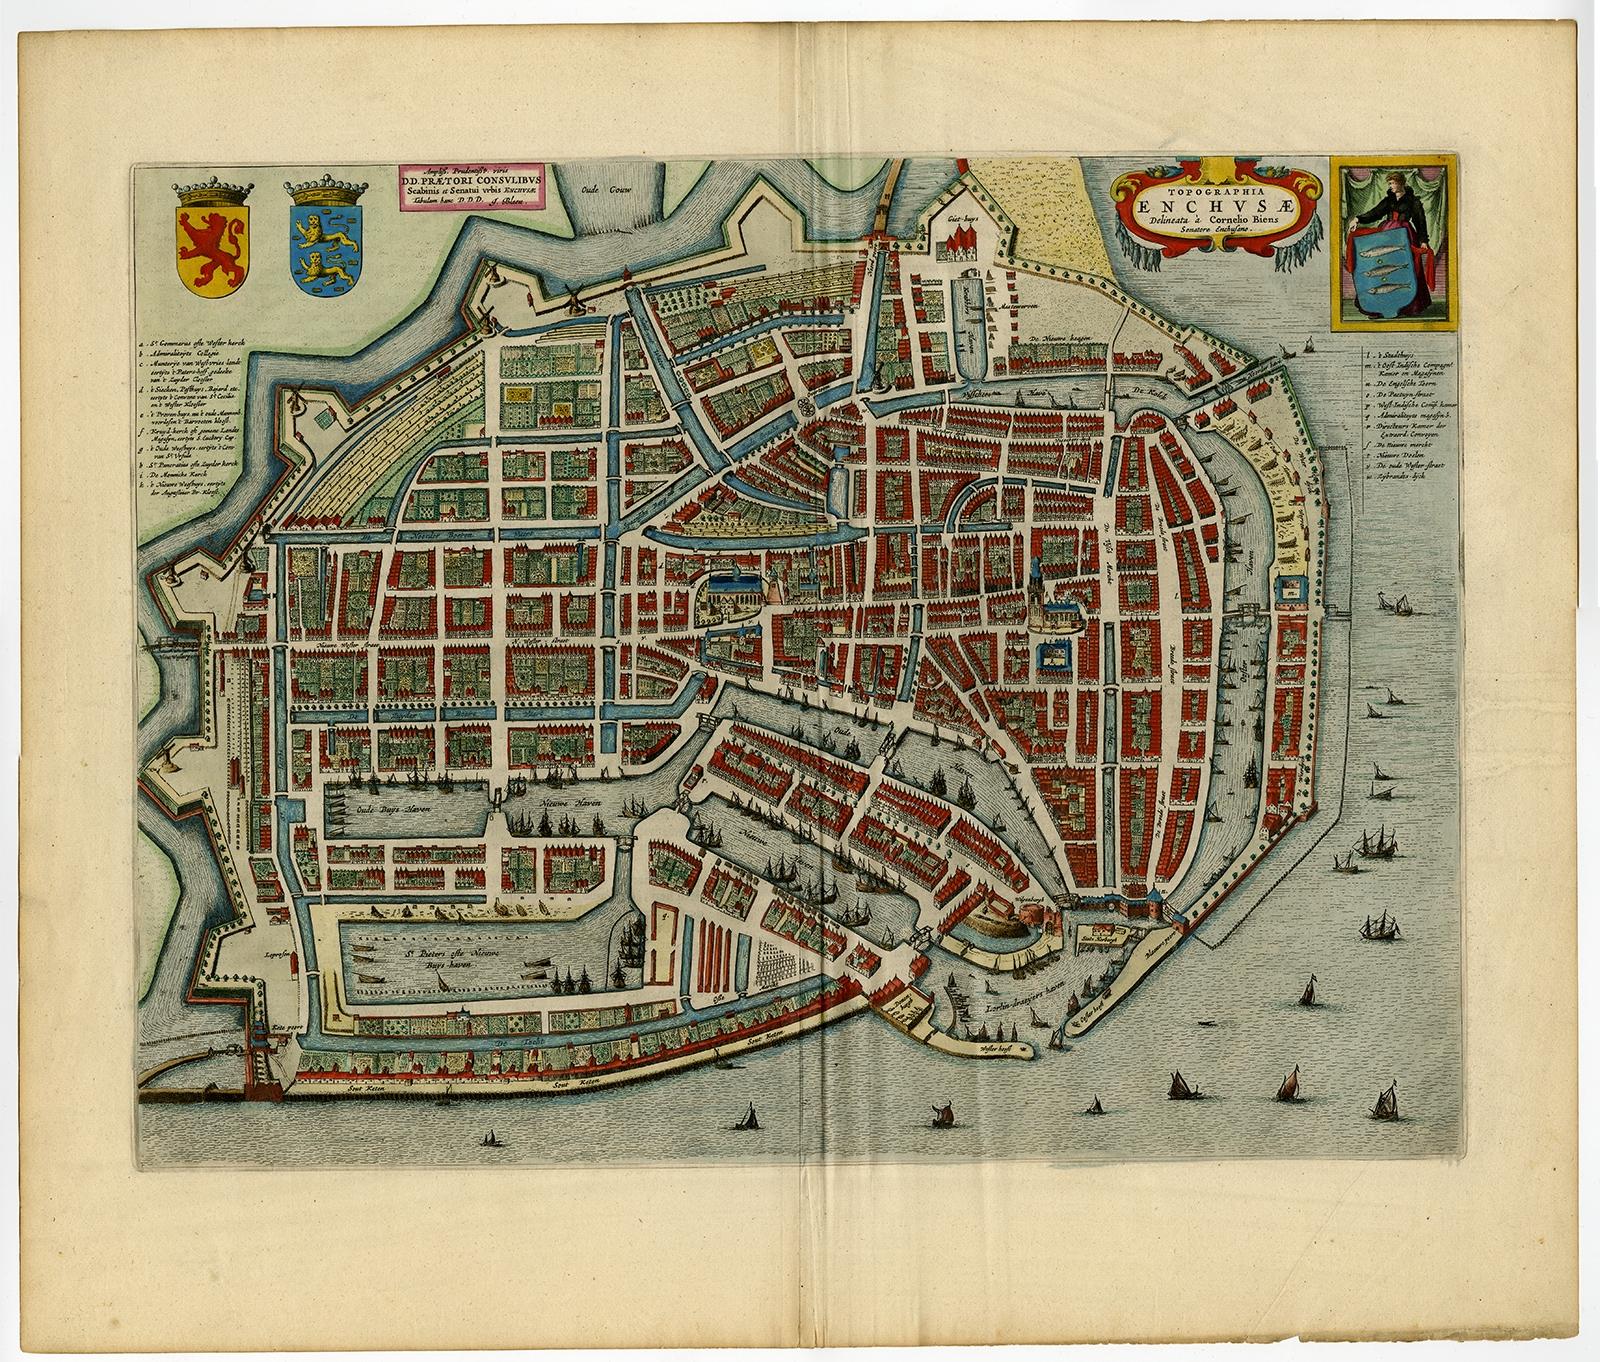 Antique print, titled: 'Topograhpiae Enchusae.' 

Bird's-eye view plan of Enkhuizen in The Netherlands, with key to locations and coats of arms. Text in Dutch on verso. This plan originates from the famous city Atlas: 'Toneel der Steeden'